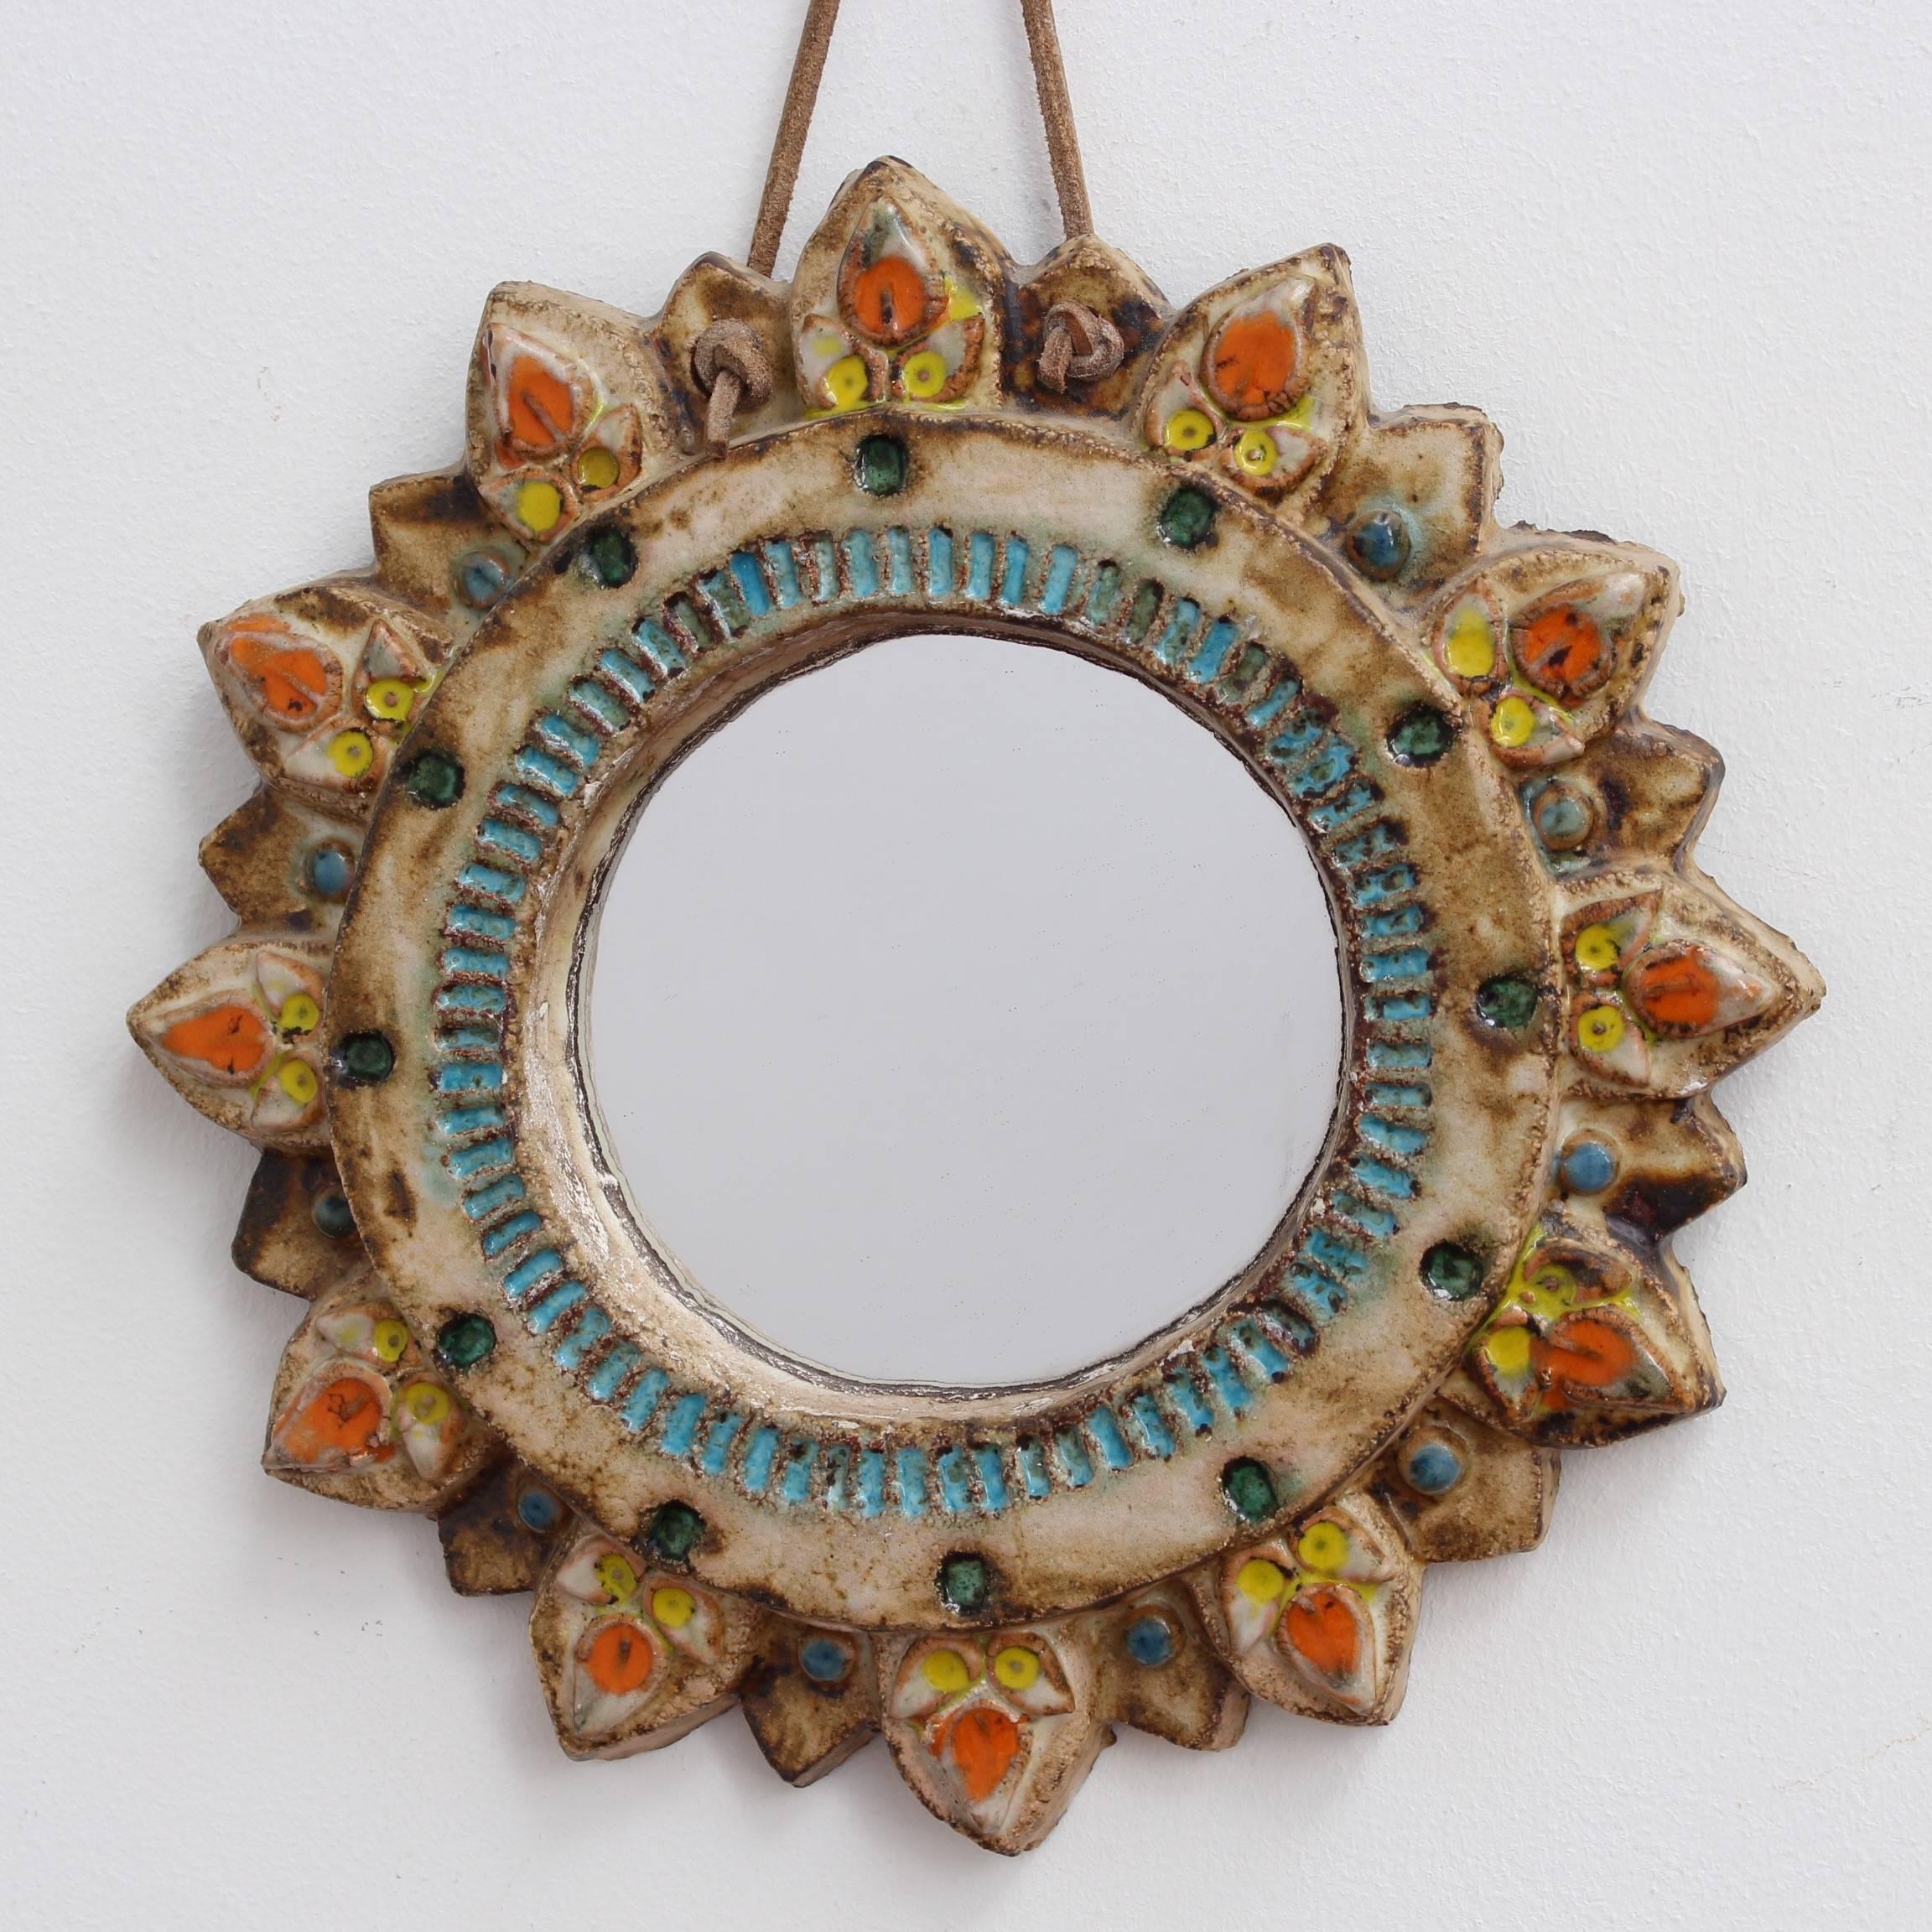 Ceramic sunburst mirror with glazed highlights by La Roue, Vallauris, France, circa 1950s. A charming rustic mirror with colourful decorative glazed details surrounding the circular mirror and emanating from the individual rays. In very good vintage